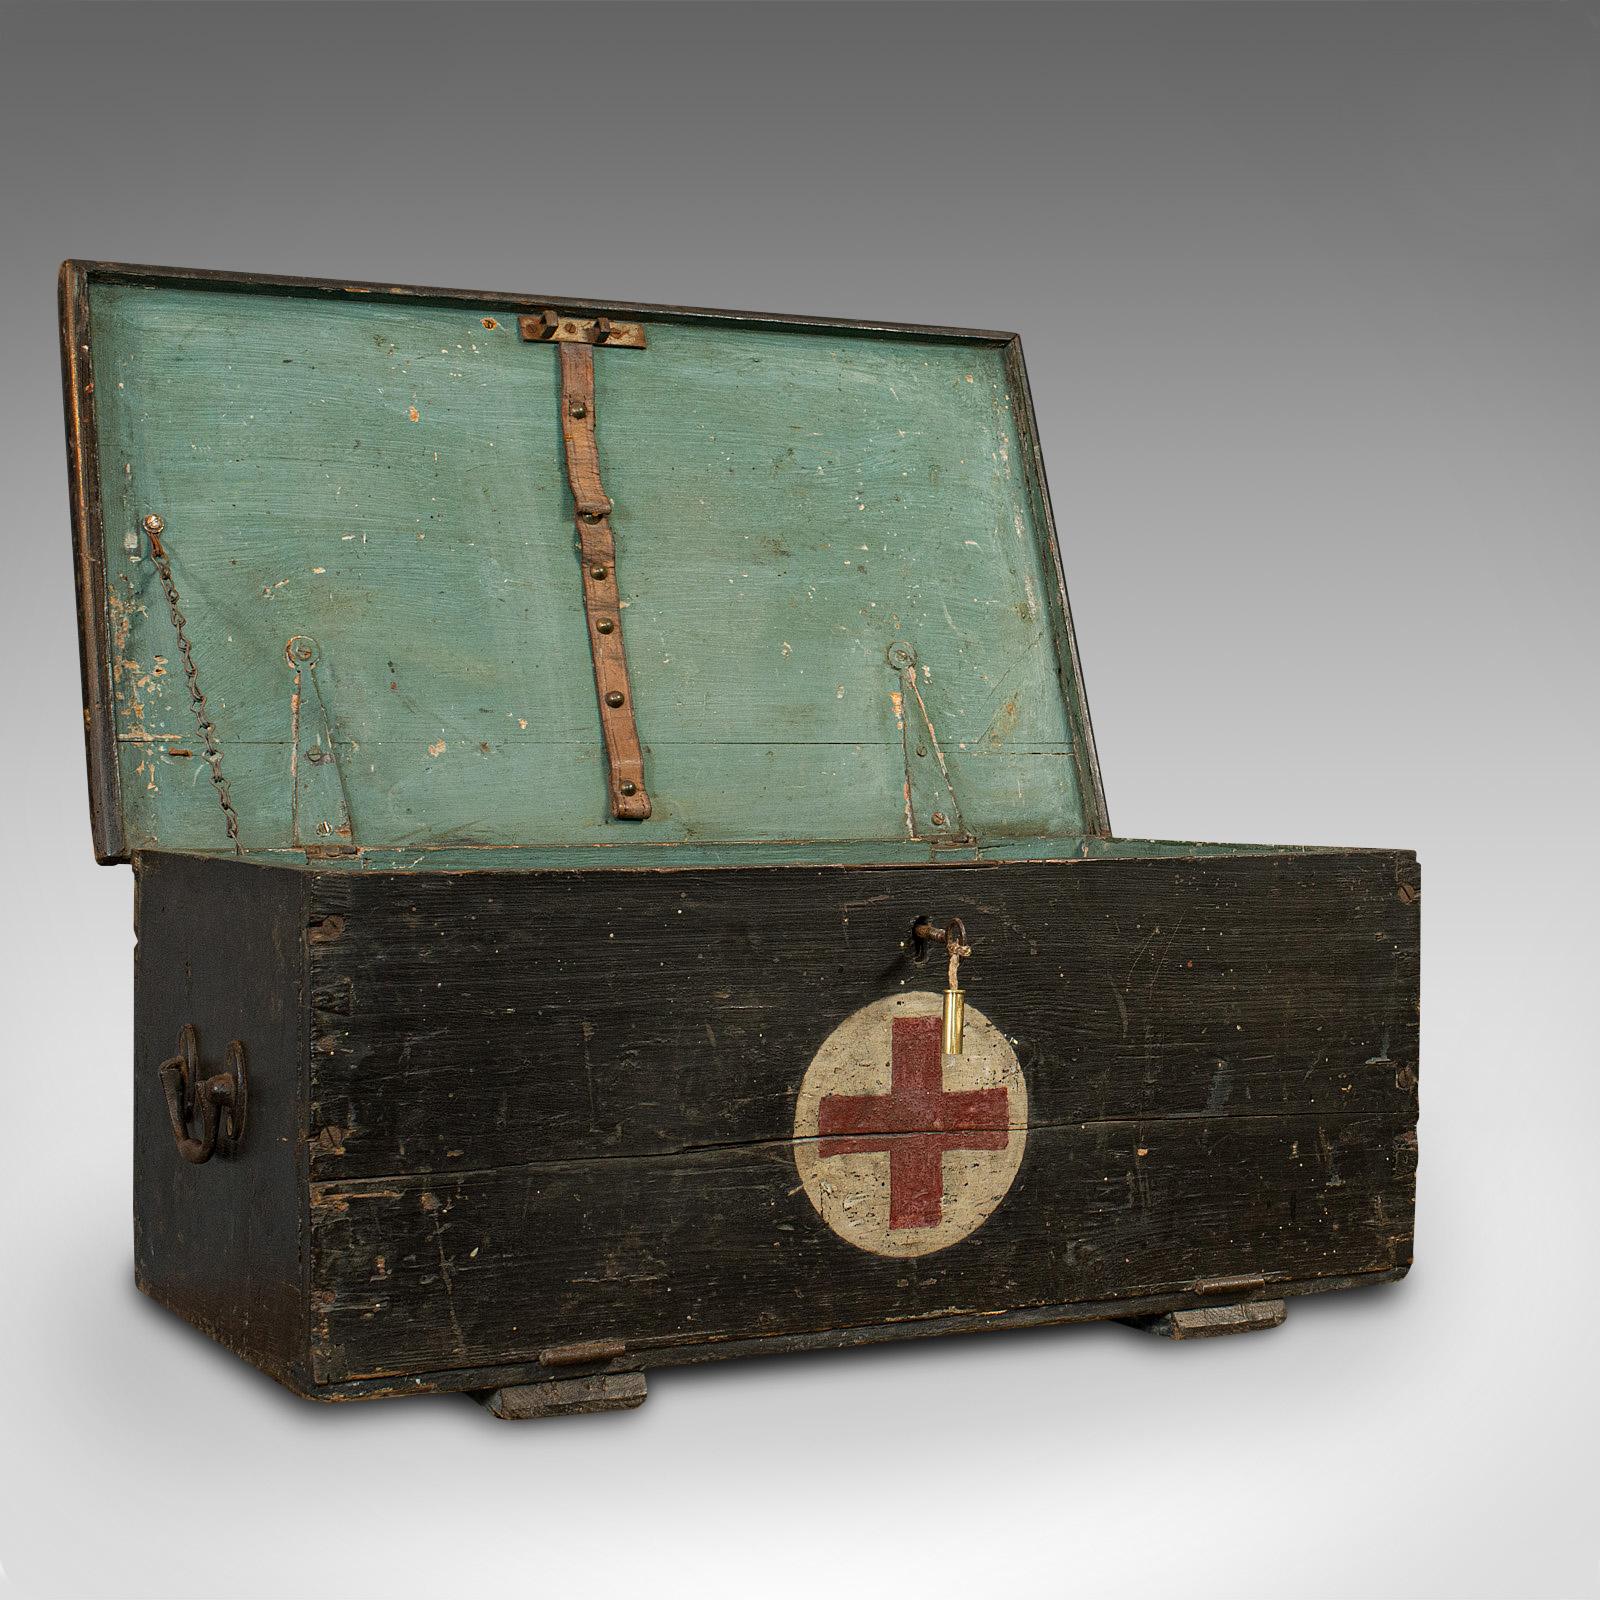 This is a vintage first aid chest. An English, pine trunk decorated for the Huddersfield Rifles regiment, dating to the mid-20th century circa 1960.

Useful storage chest - ideal as coffee table
Displays a desirable aged patina
Dark painted pine